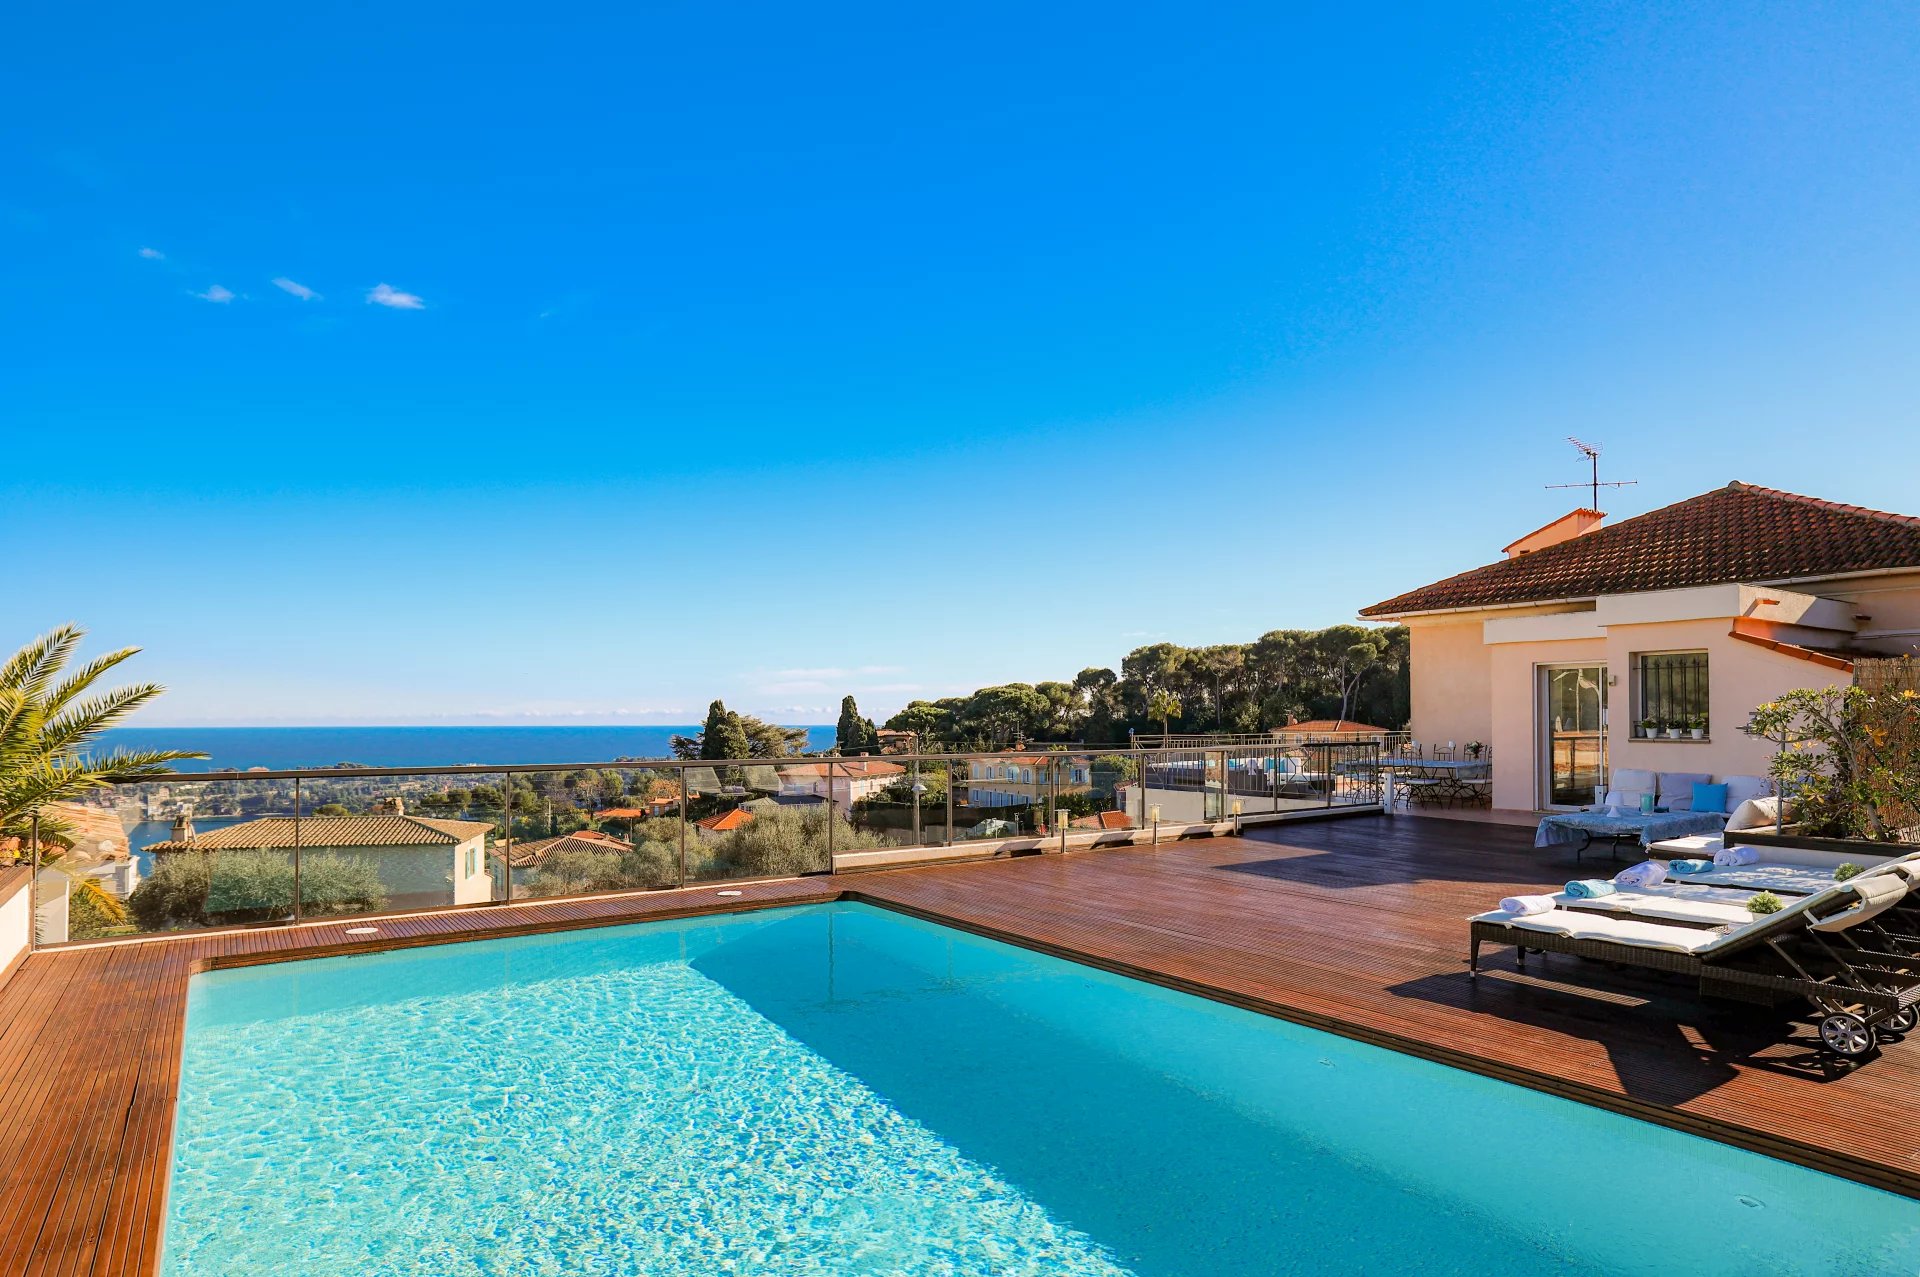 PROPERTY FOR SALE IN NICE MONT BORON - PANORAMIC SEA VIEW - POOL - TERRACES - GARDEN